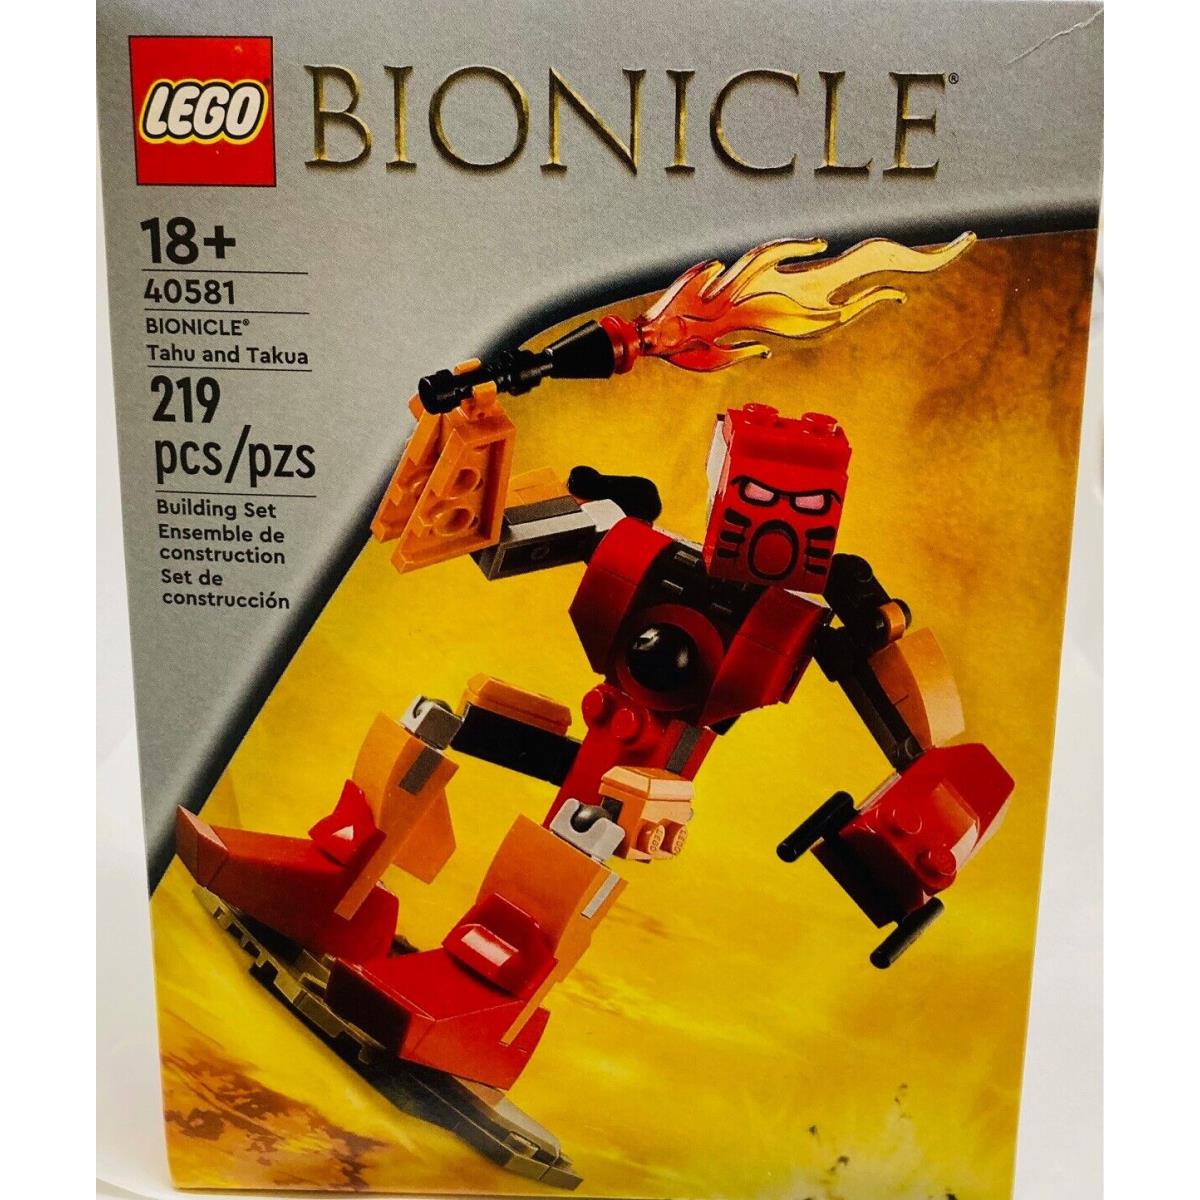 Lego Bionicle Tahu and Takua 40581 Building Kit Toy Set 219 Pieces